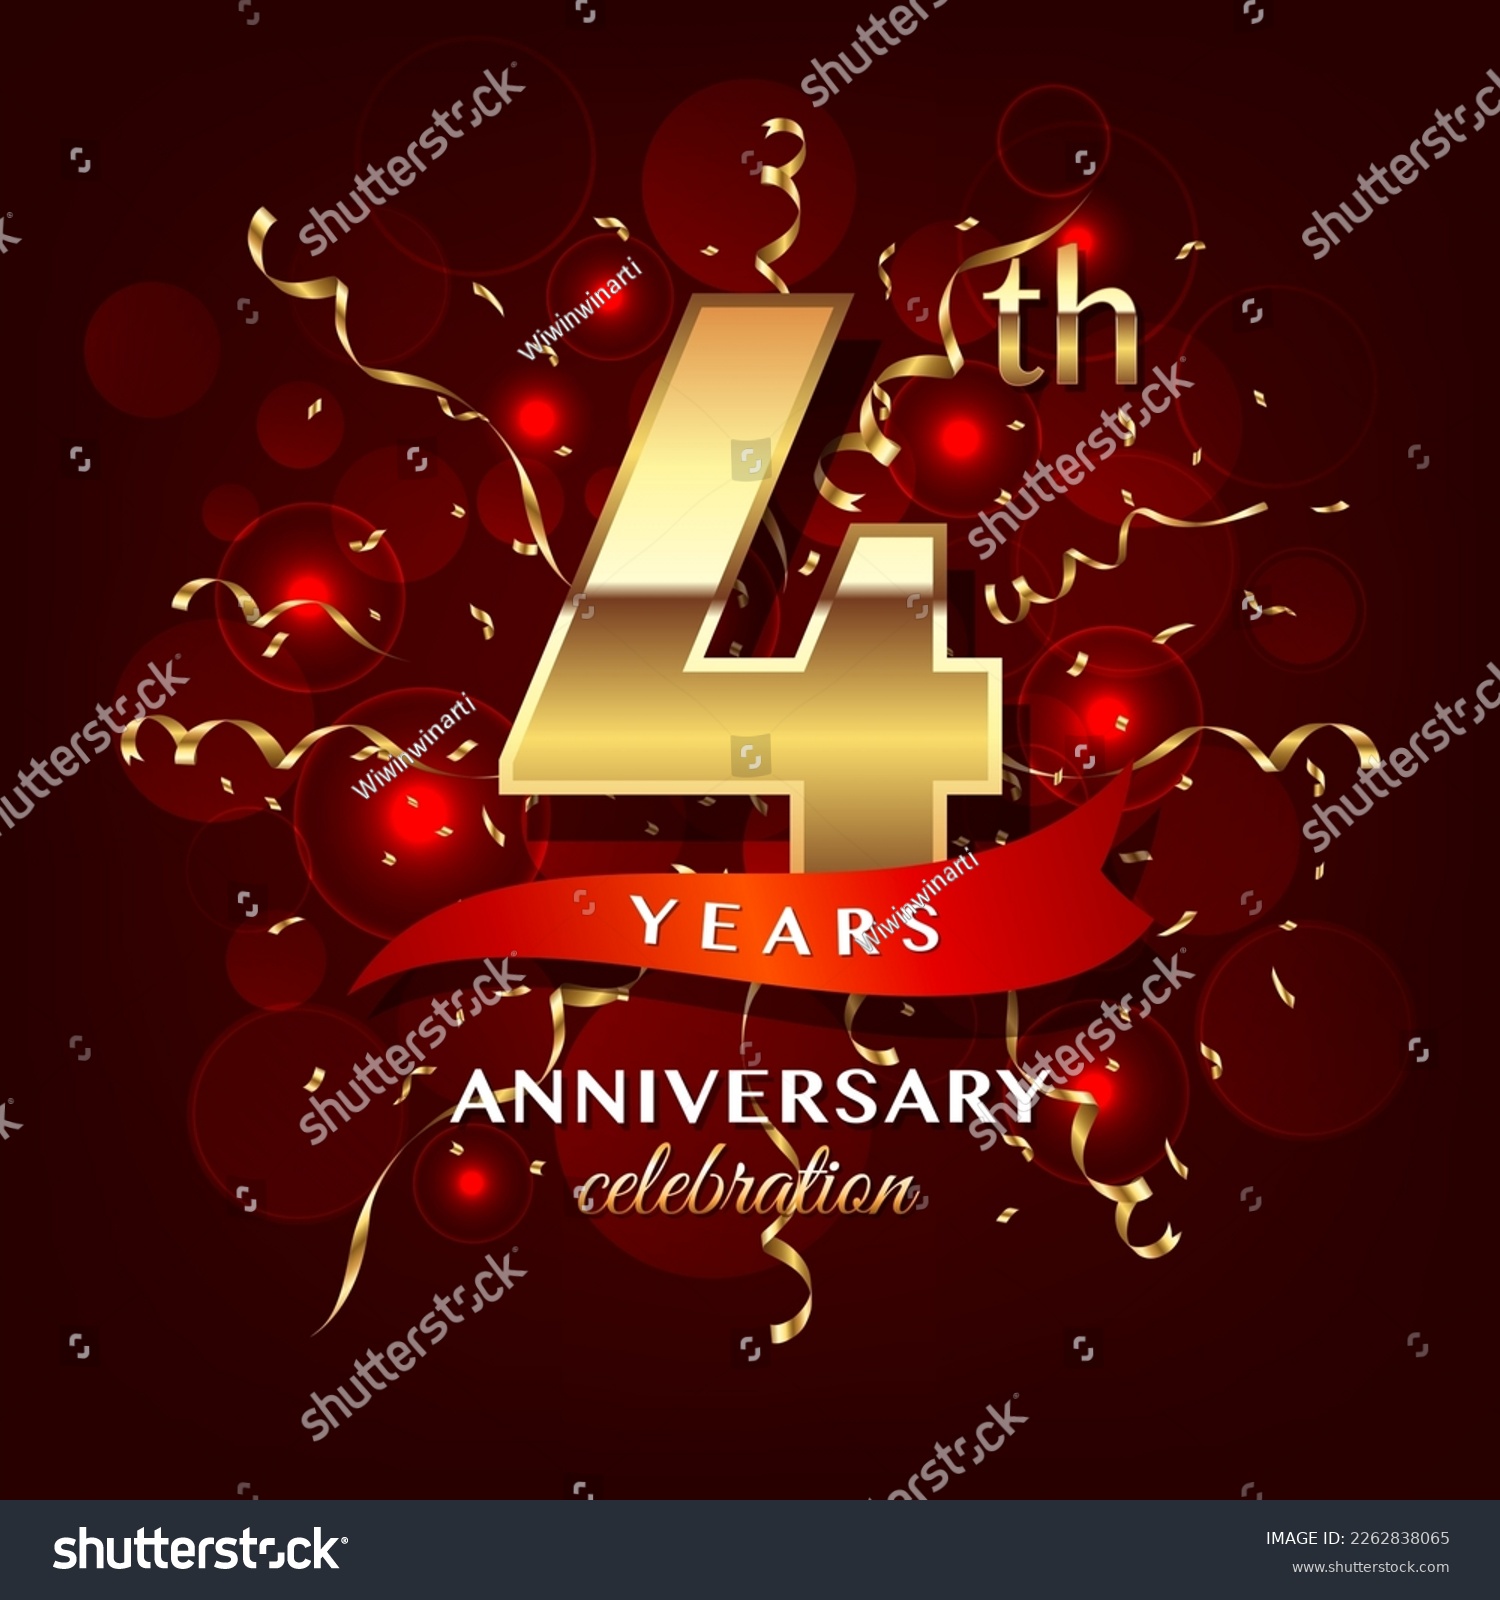 SVG of 4th Anniversary logo design with golden numbers and red ribbon for anniversary celebration event, invitation, wedding, greeting card, banner, poster, flyer, brochure, book cover. Logo Vector Template svg